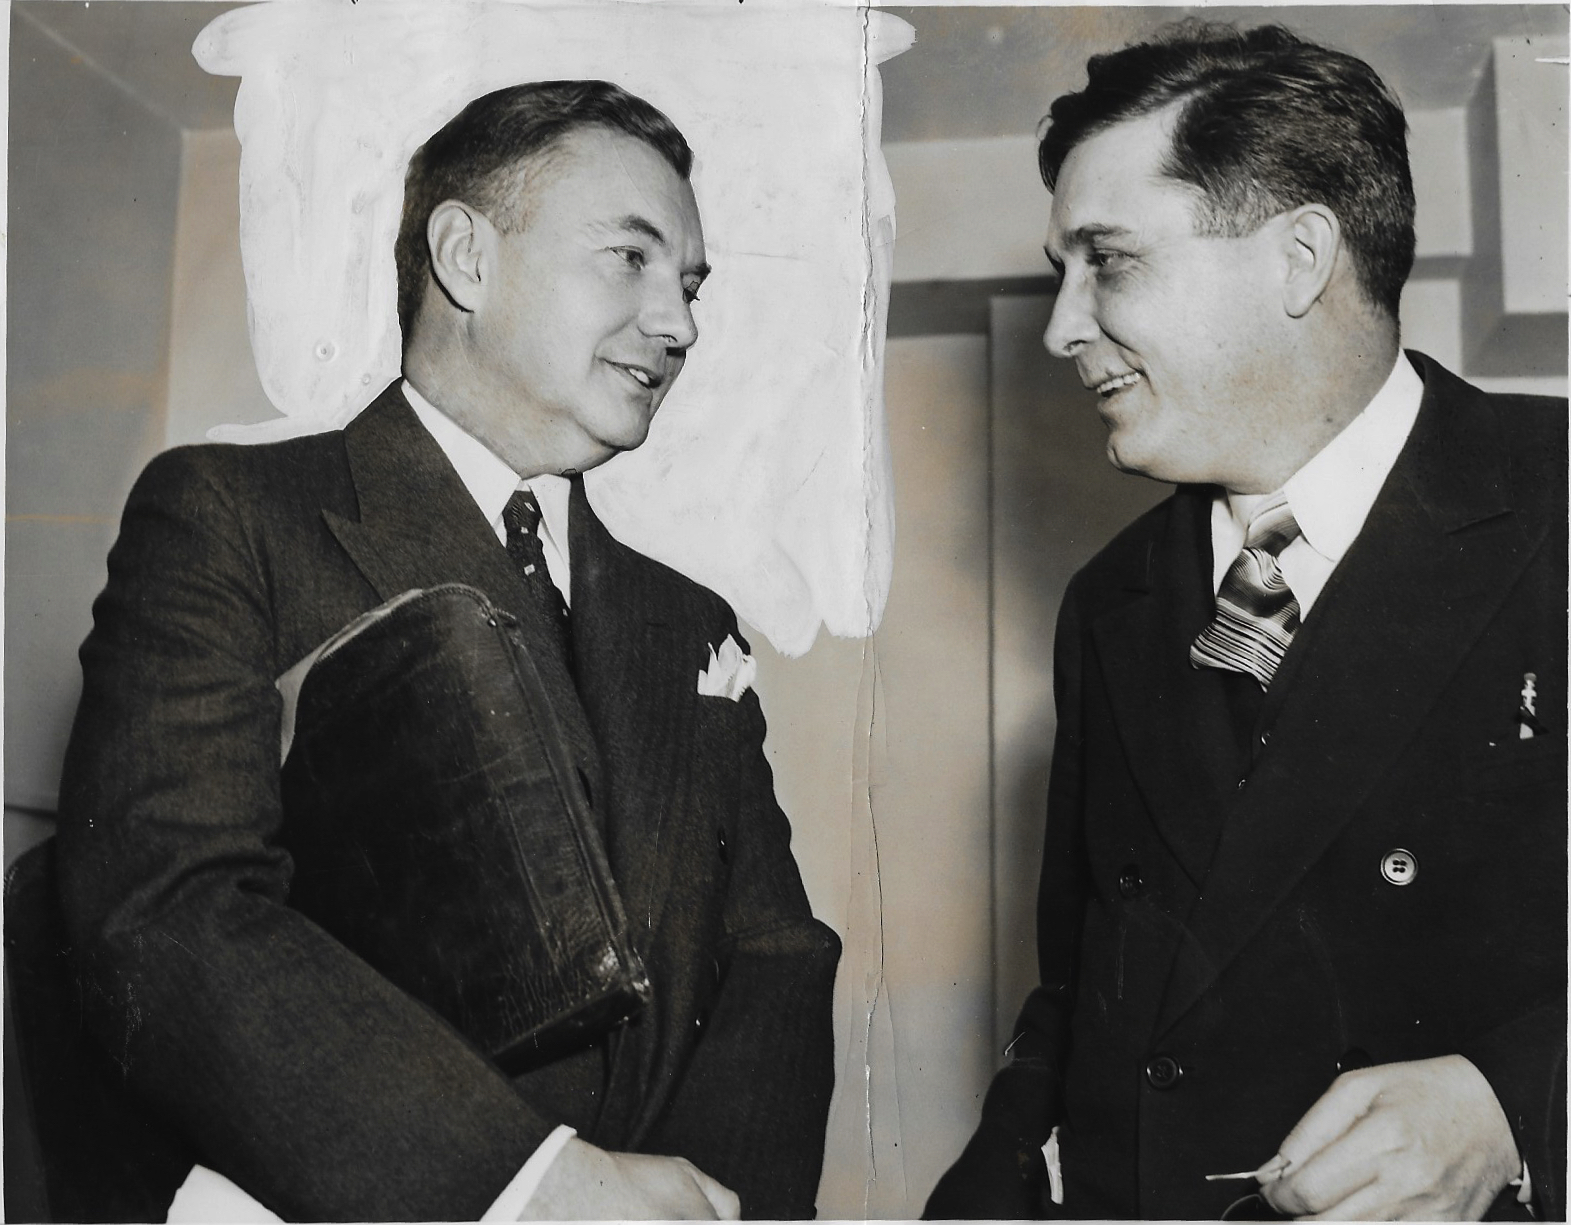 Robert H. Jackson and Wendell L. Willkie, New York, 1938